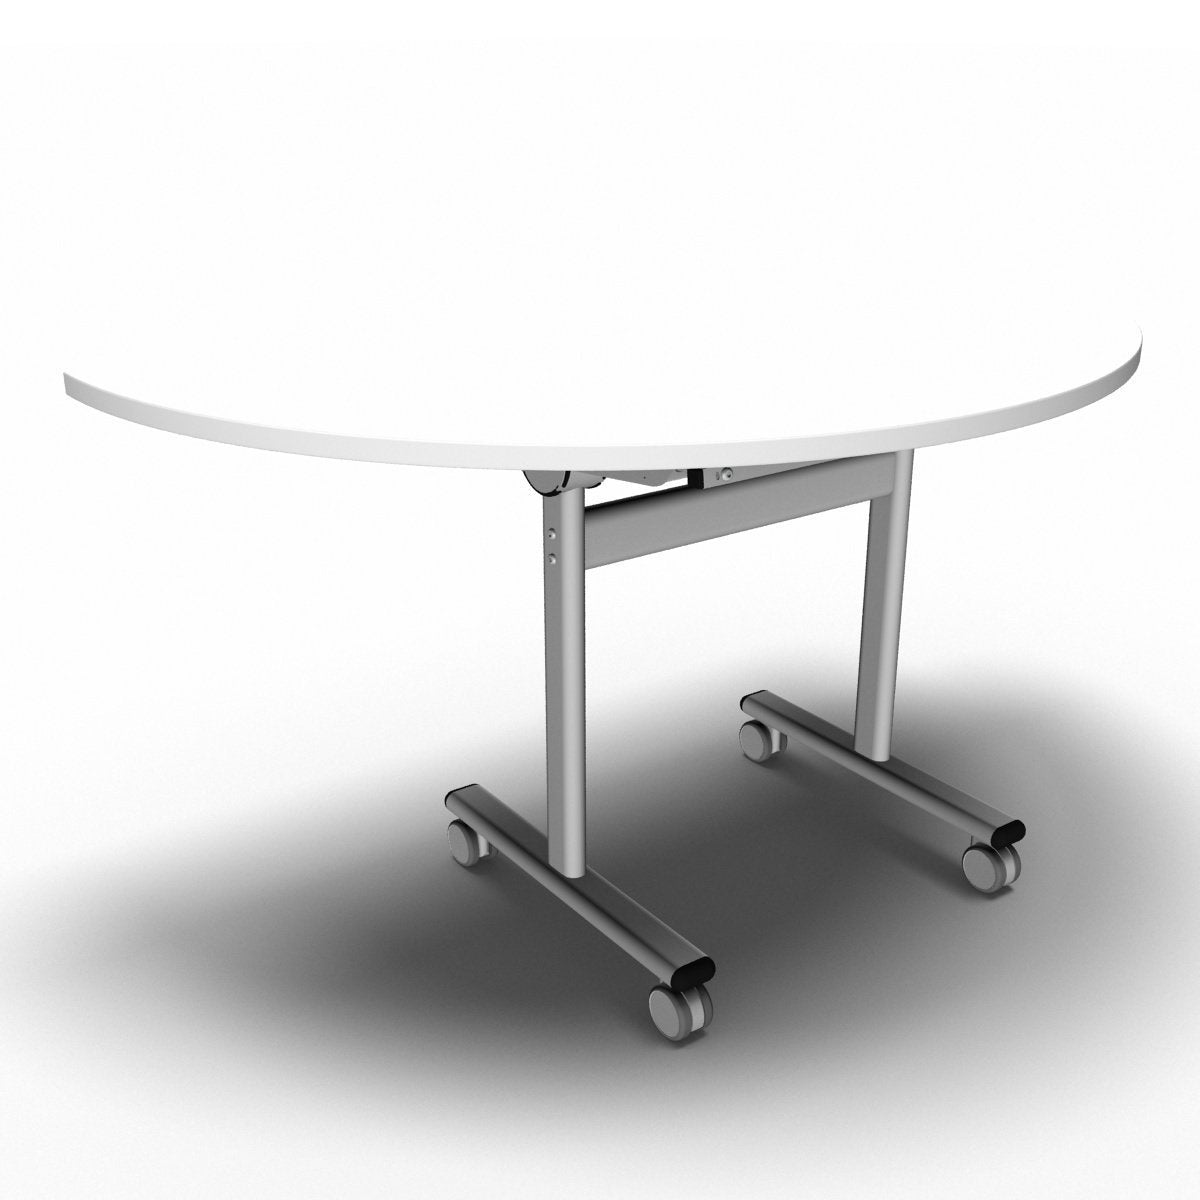 Table 1400 x 700 x 720mm / Semi Circular / White Synergy Flip Top Tables